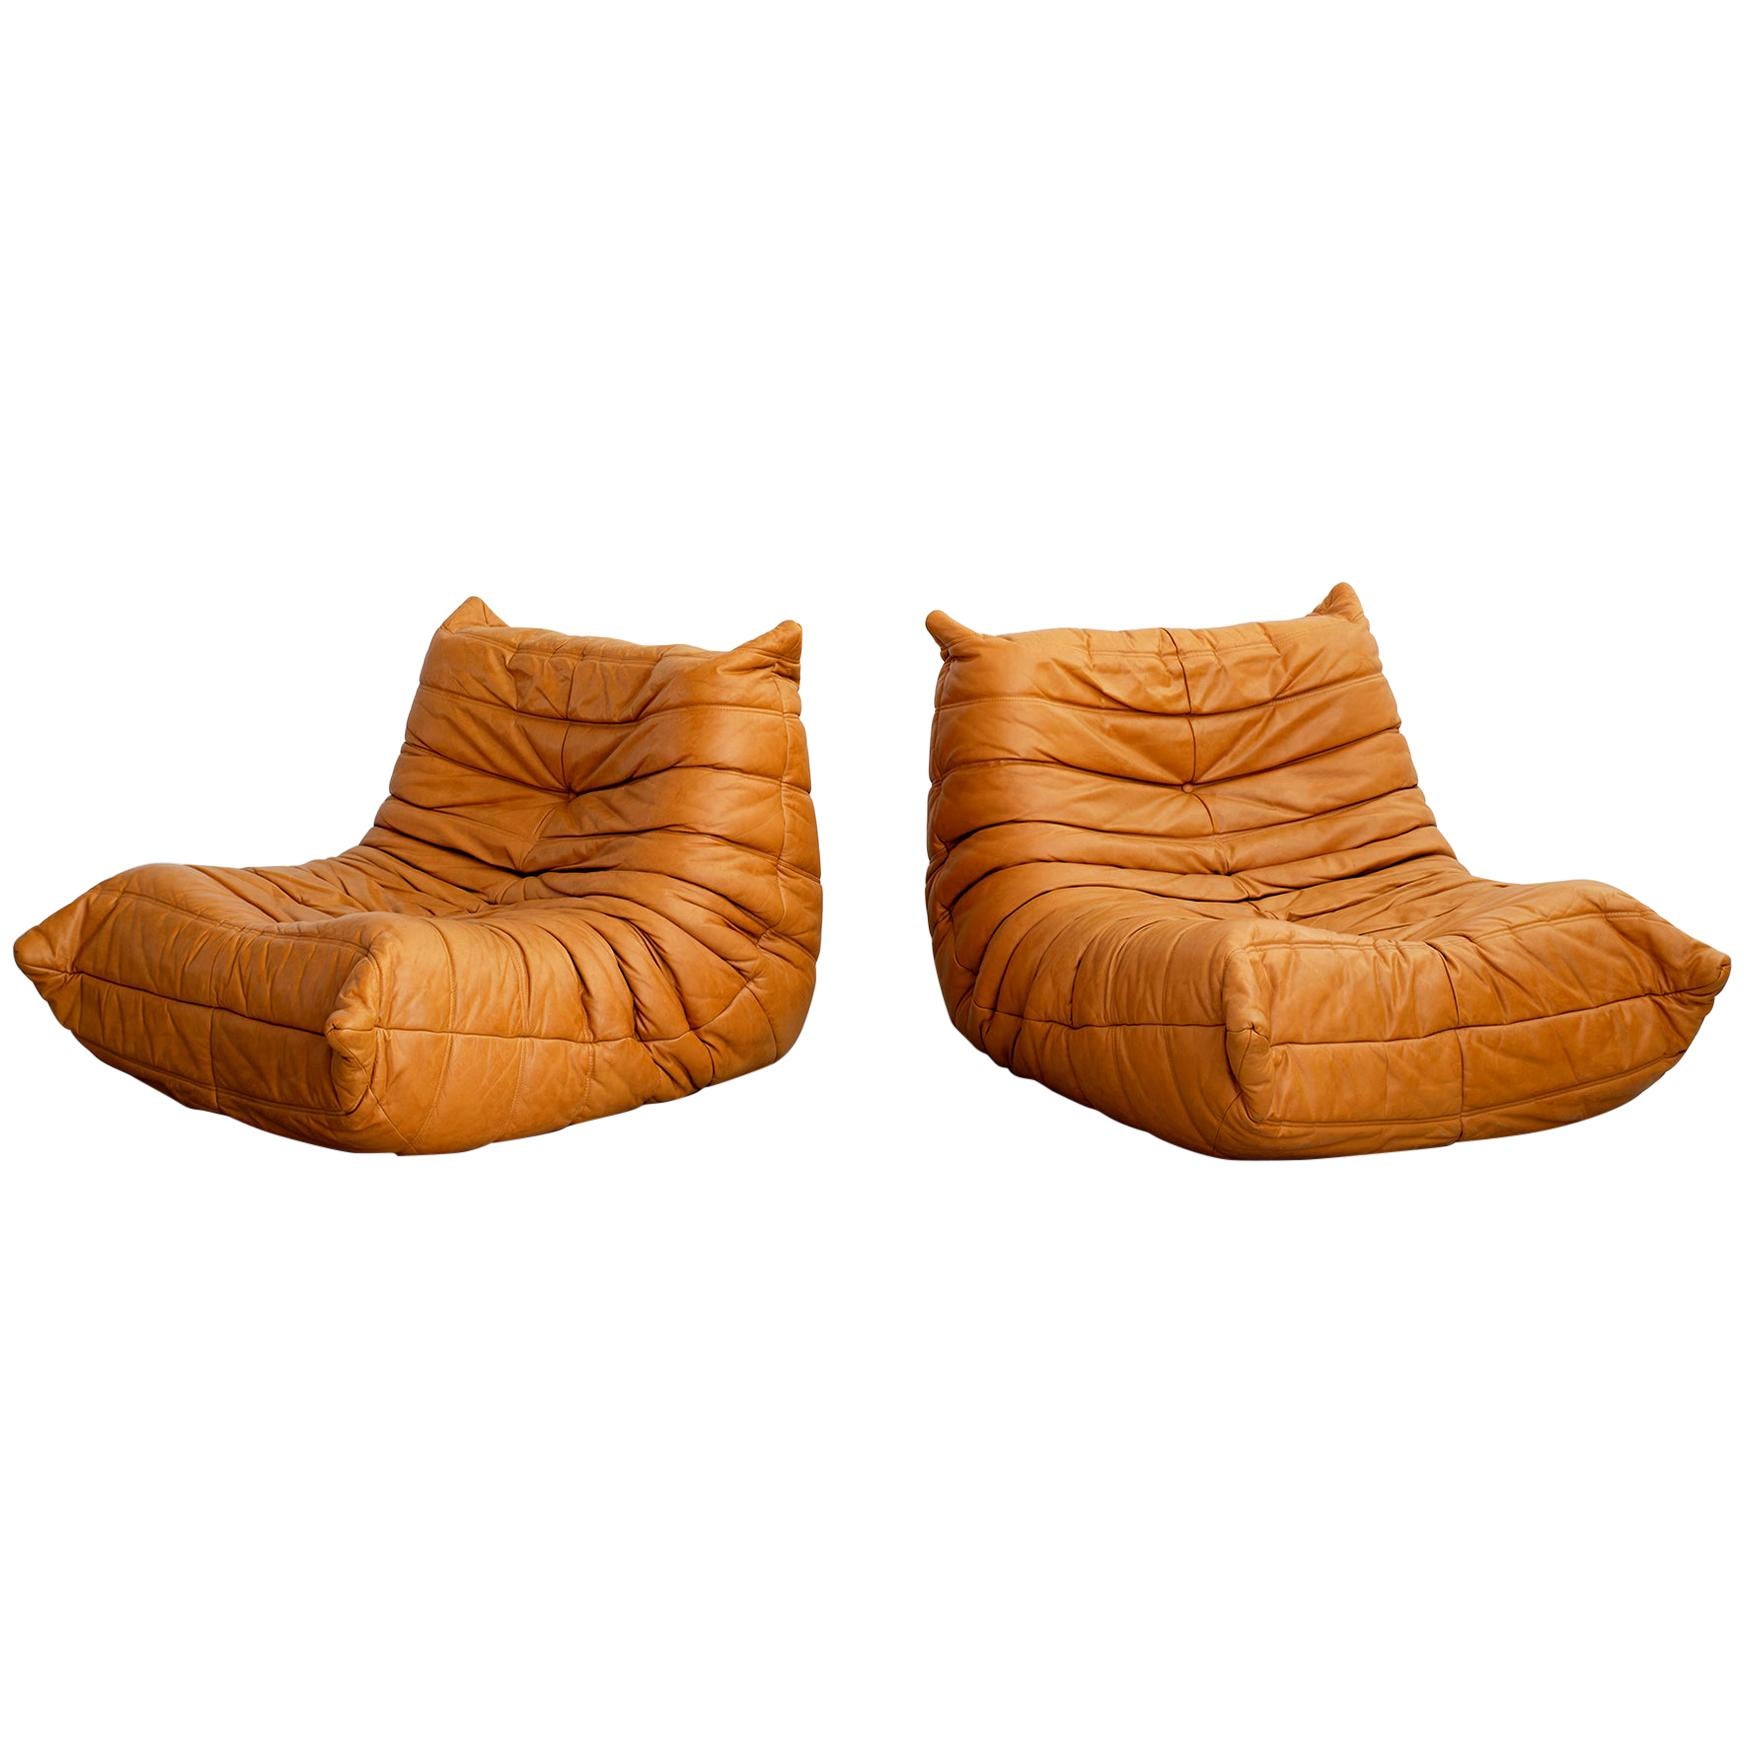 Pair of Togo Lounge Chairs by Michel Ducaroy for Ligne Roset